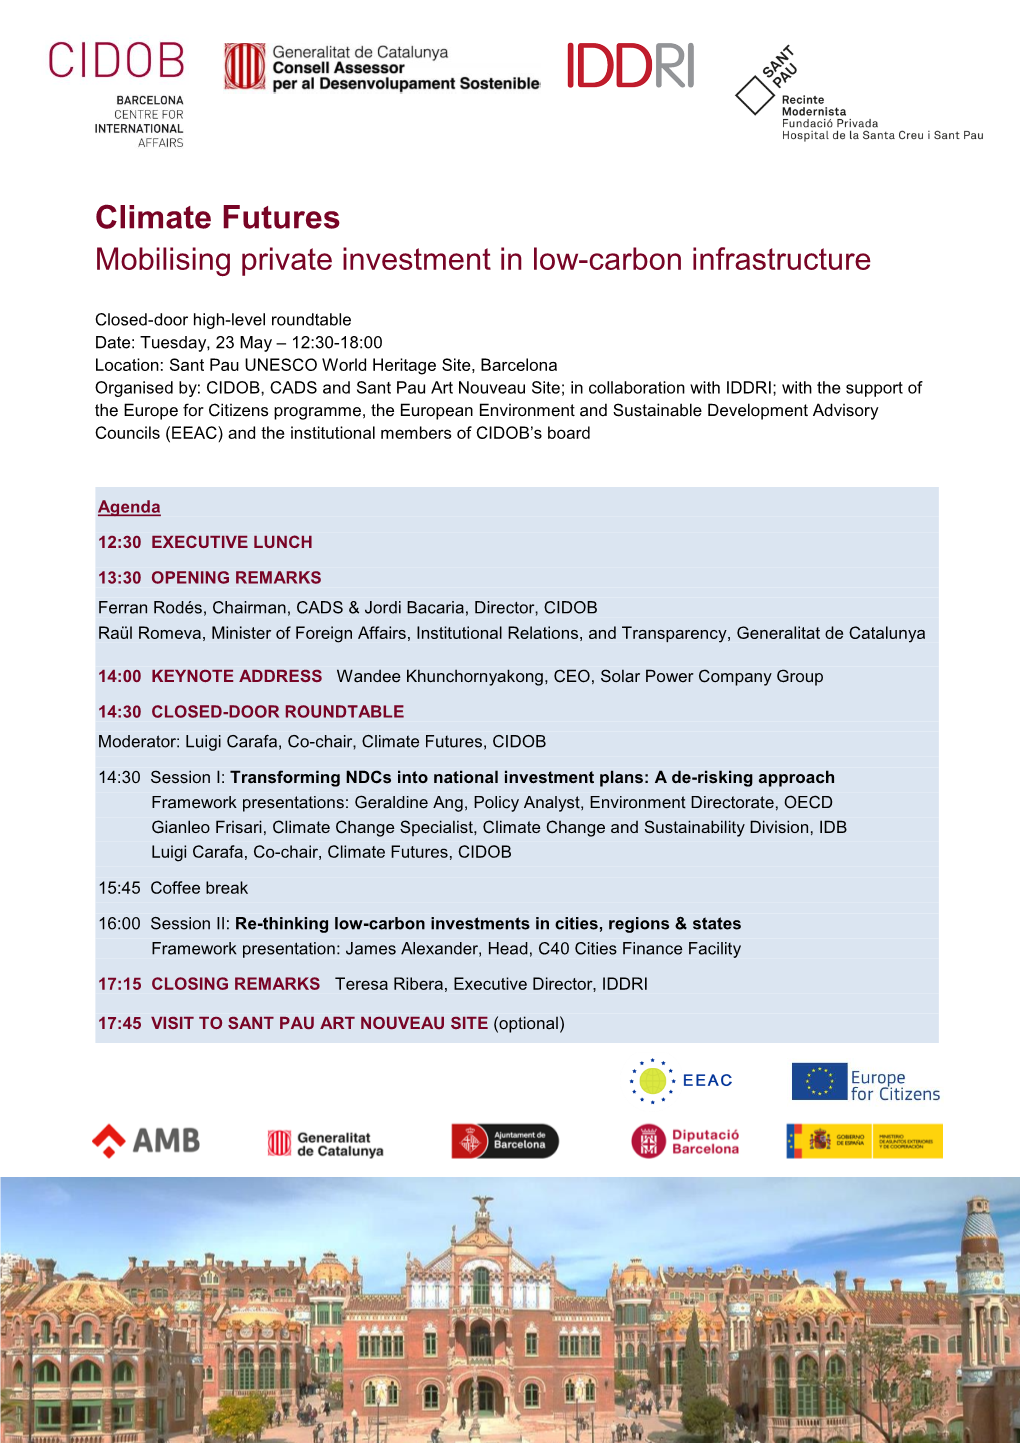 Climate Futures Mobilising Private Investment in Low-Carbon Infrastructure